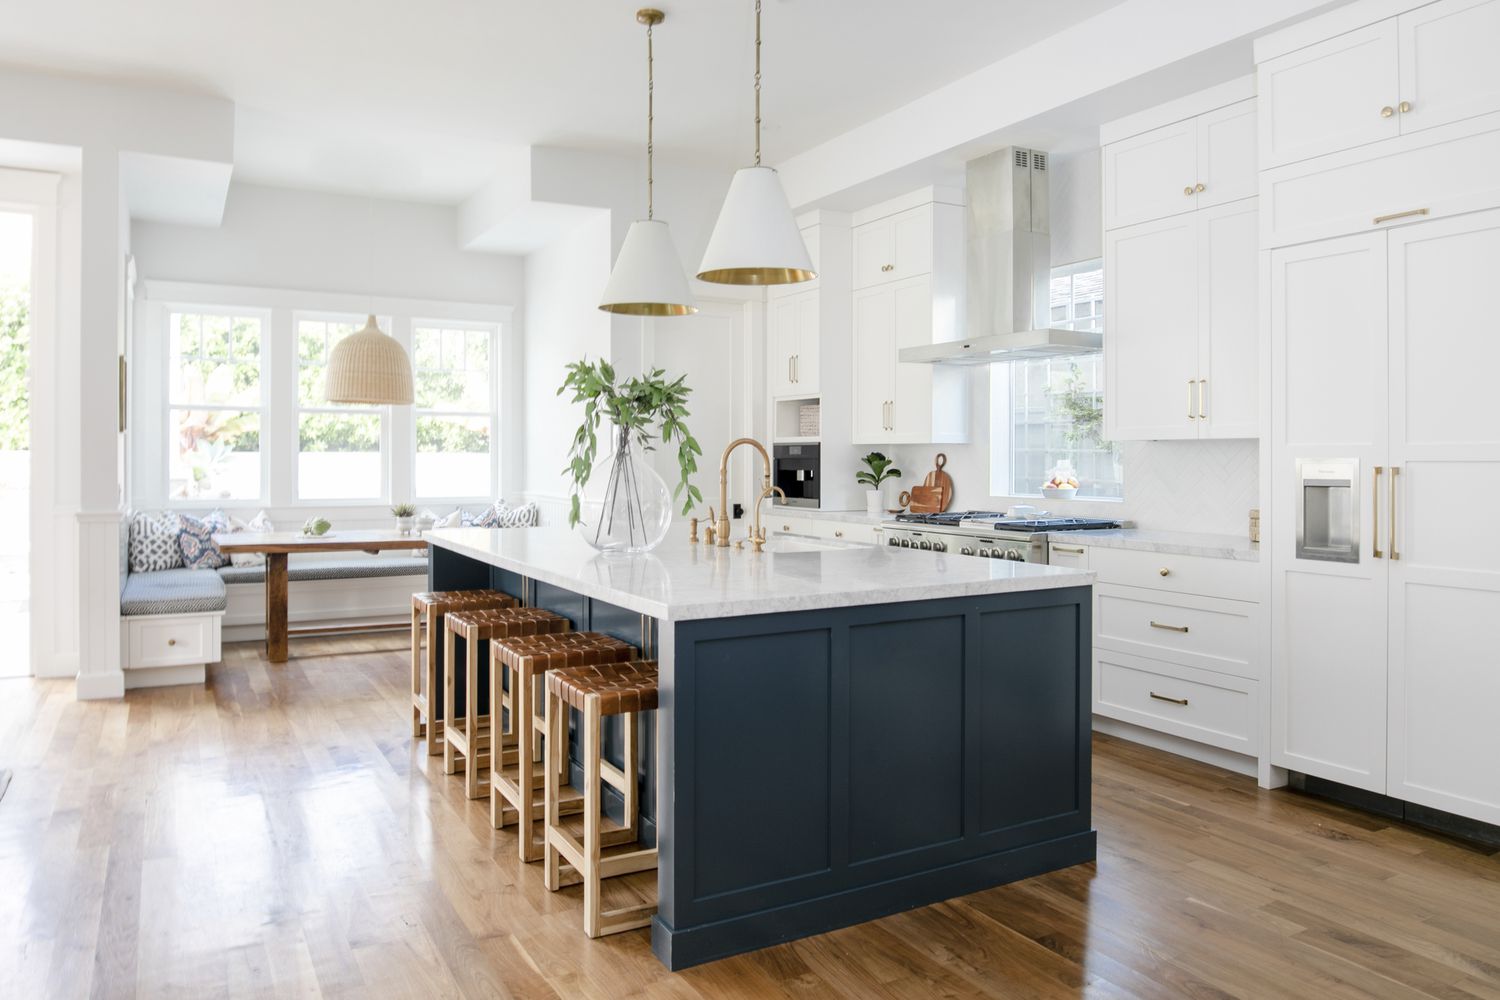 How To Decorate Your Kitchen Island